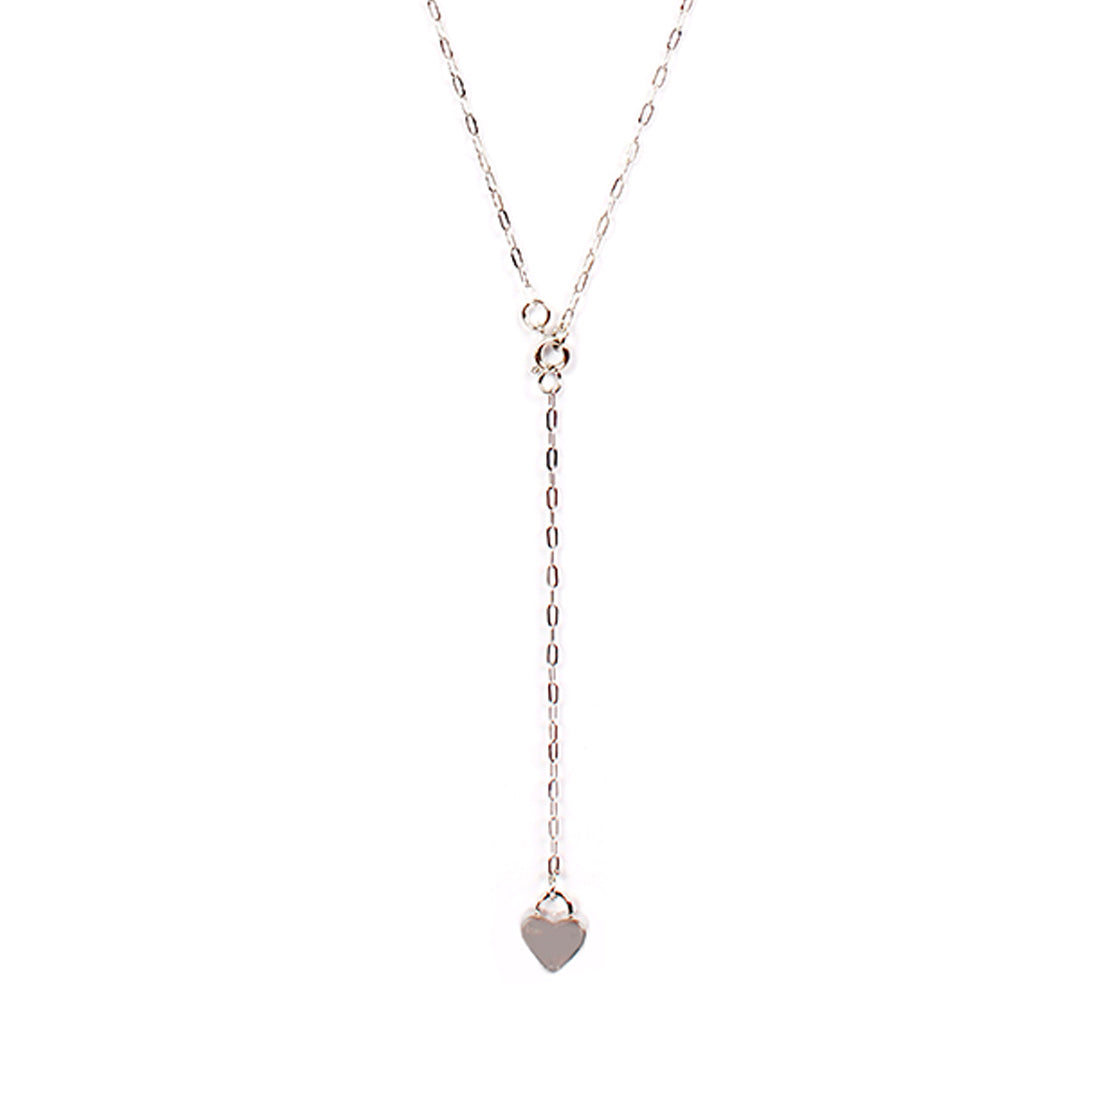 DAINTY SILVER-TONED HEART DROP PENDANT CHAIN-LINK NECKLACE